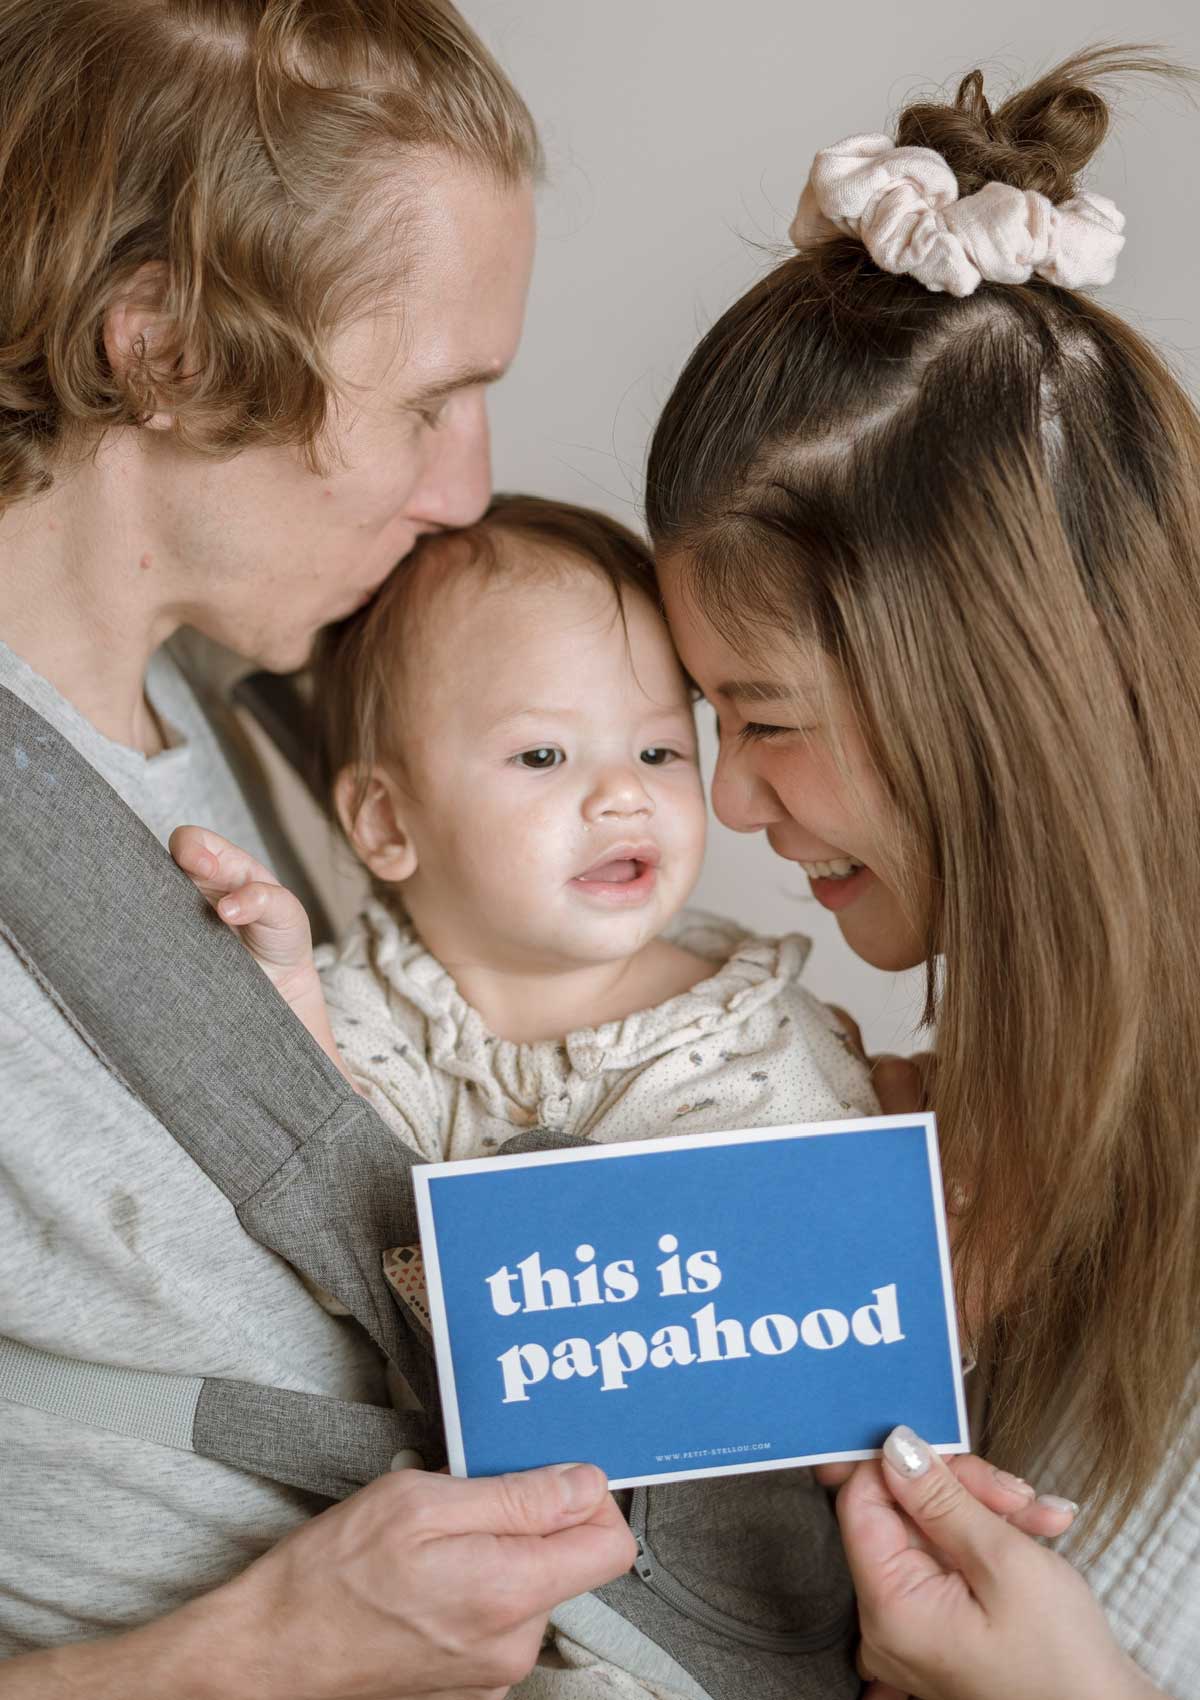 Card "this is papahood"